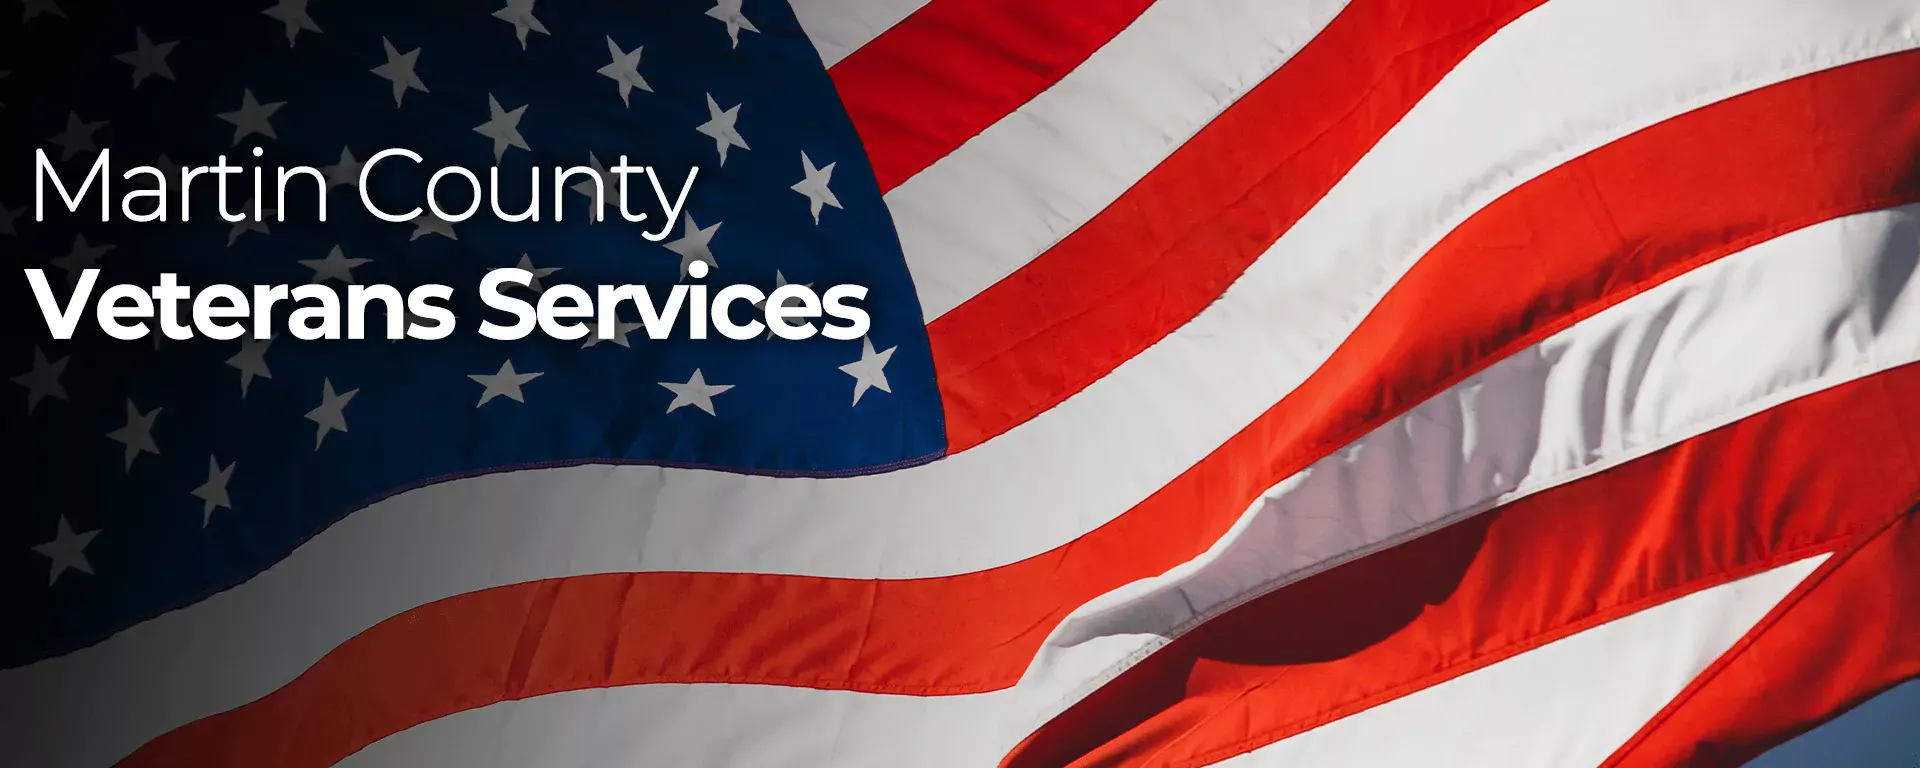 Martin County Veterans Services and American flag